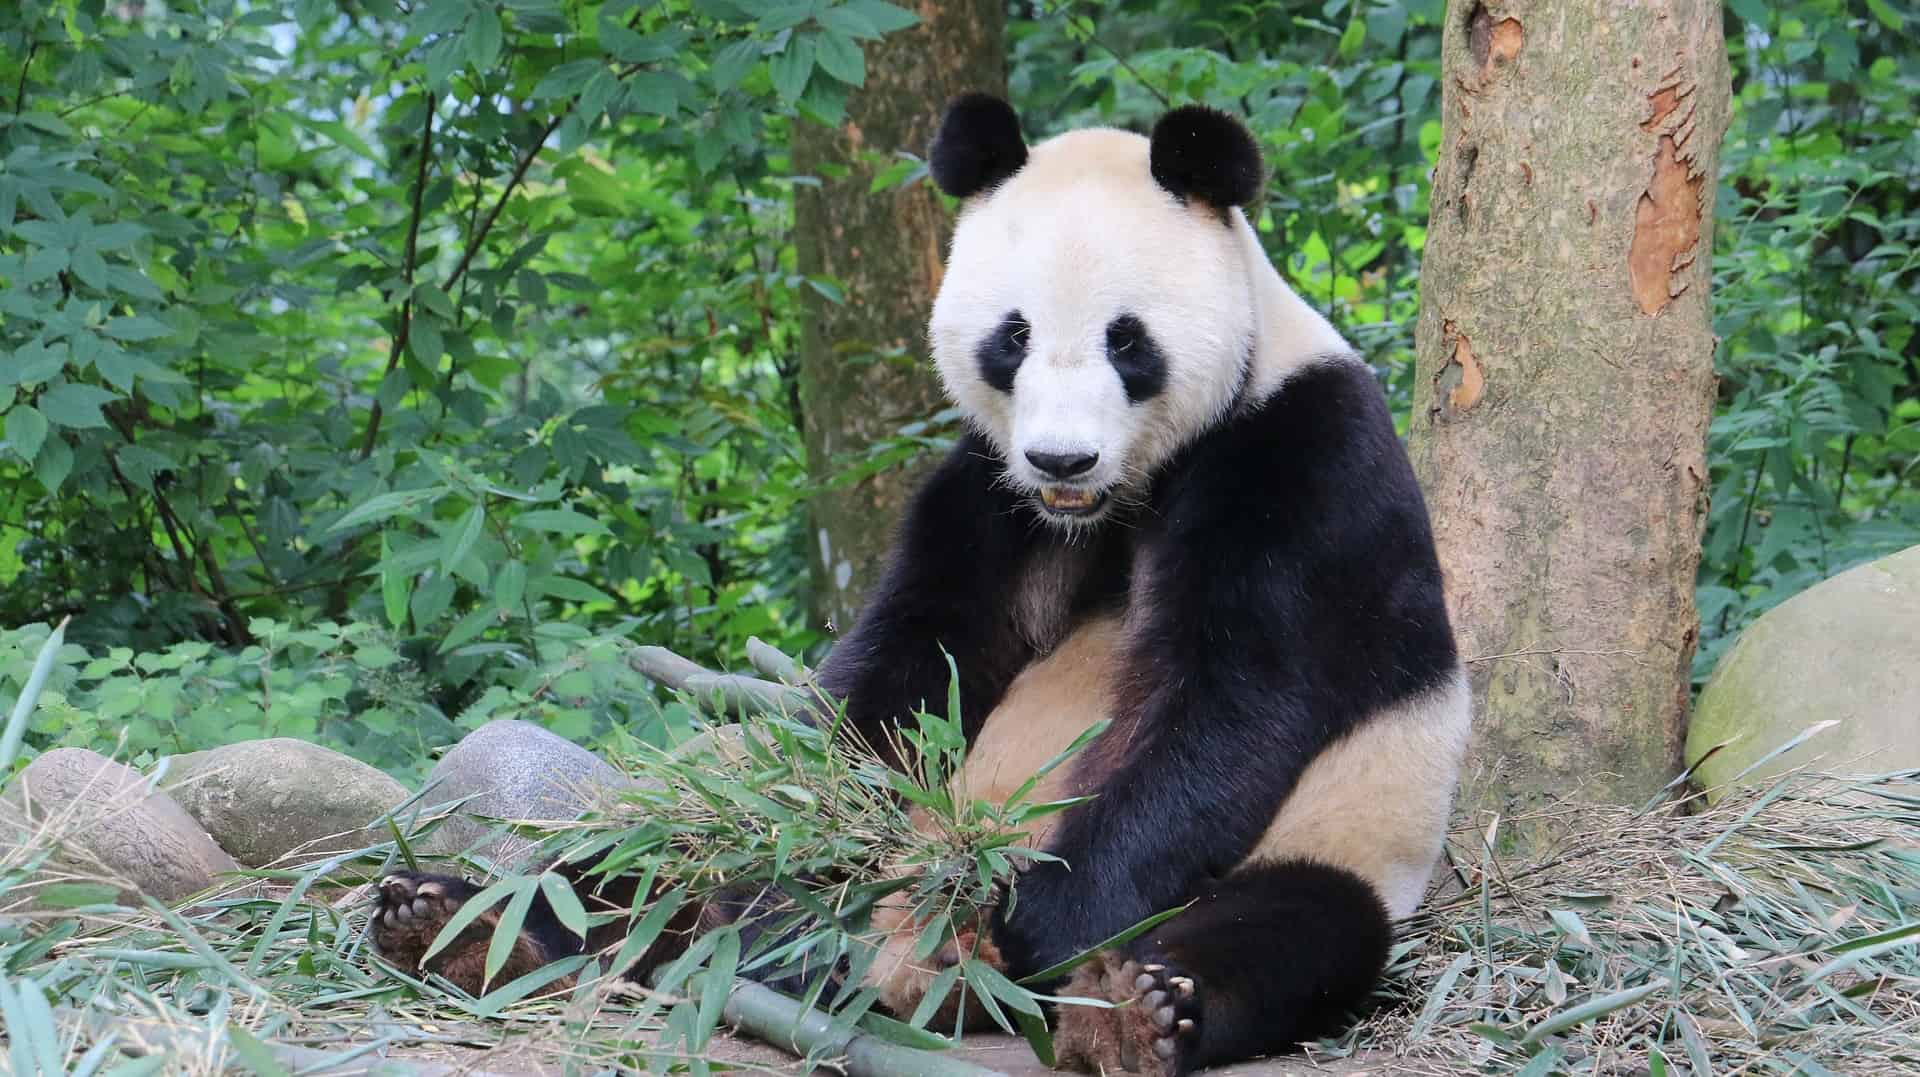 are there any pandas outside of china